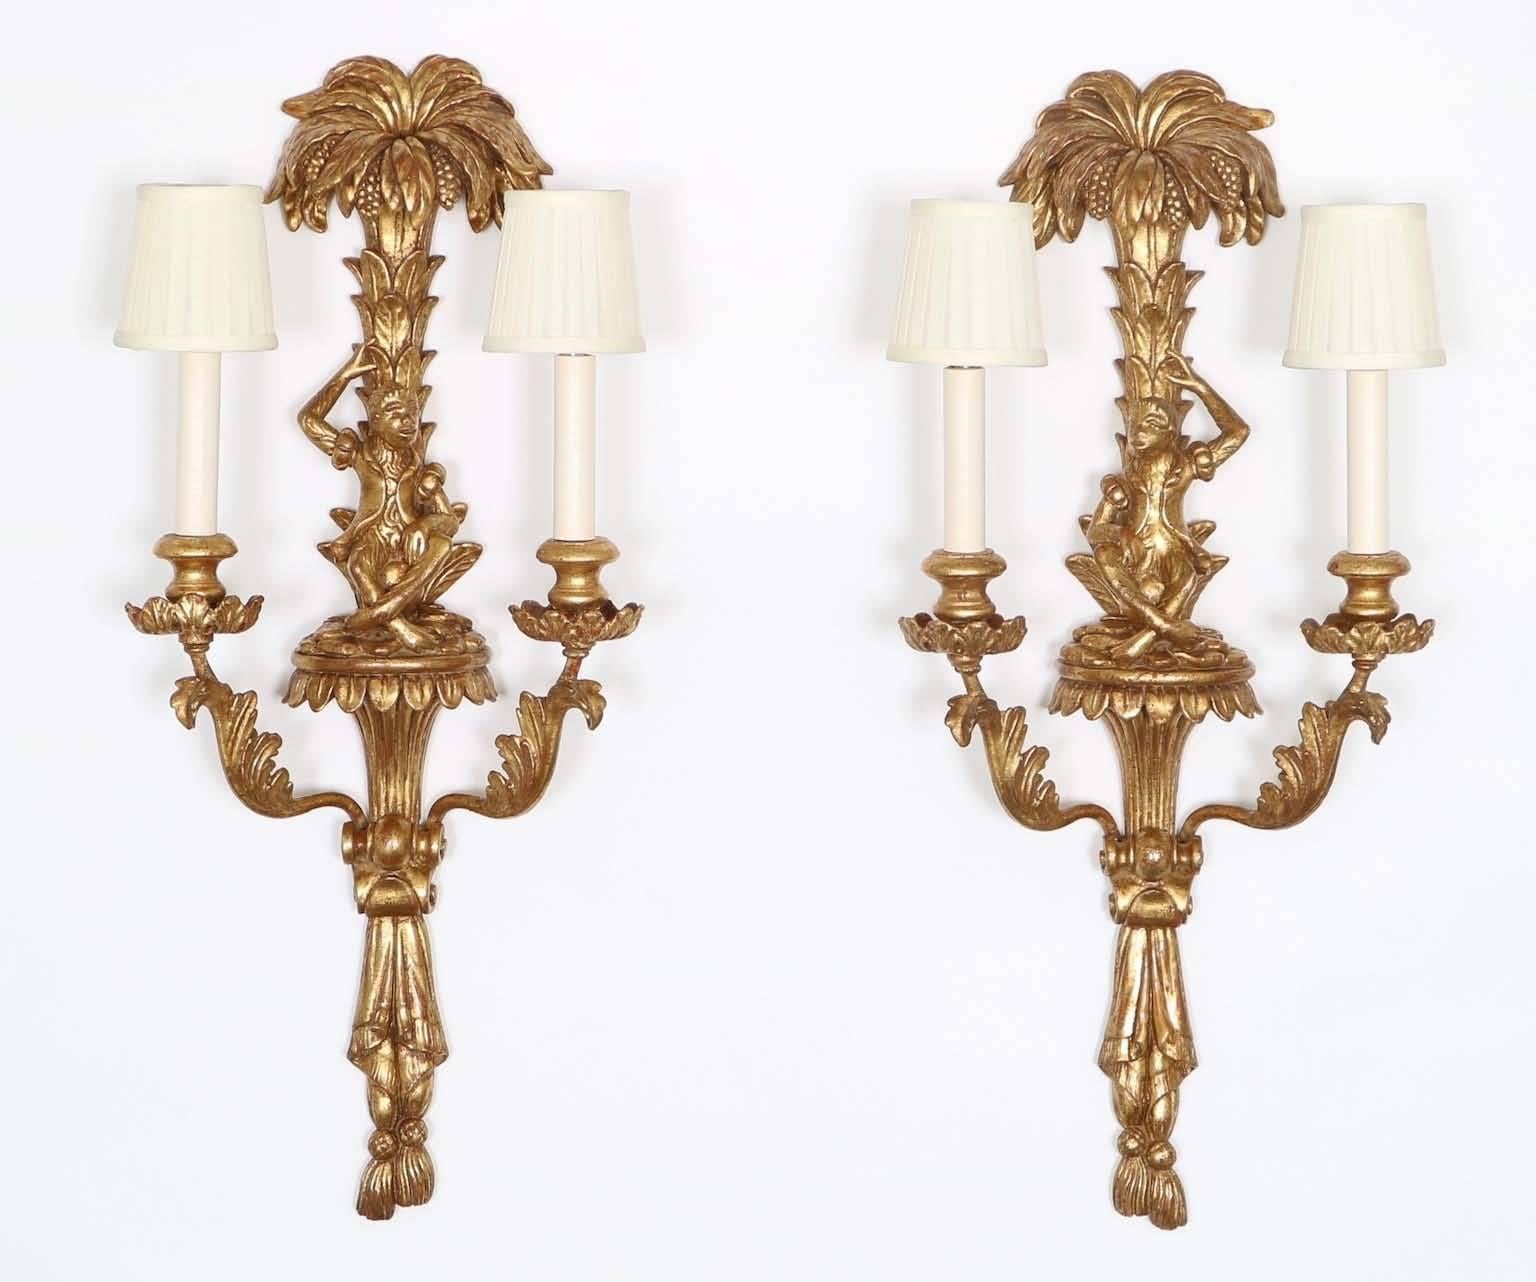 A pair of Italian Mid-Century Modern era 1950s candelabra wall sconces, influenced by the Hollywood Regency style, each of ornately carved gilded wood, featuring monkeys seated beneath palm trees, flanked by two-lights with acanthus arms. Wiring and